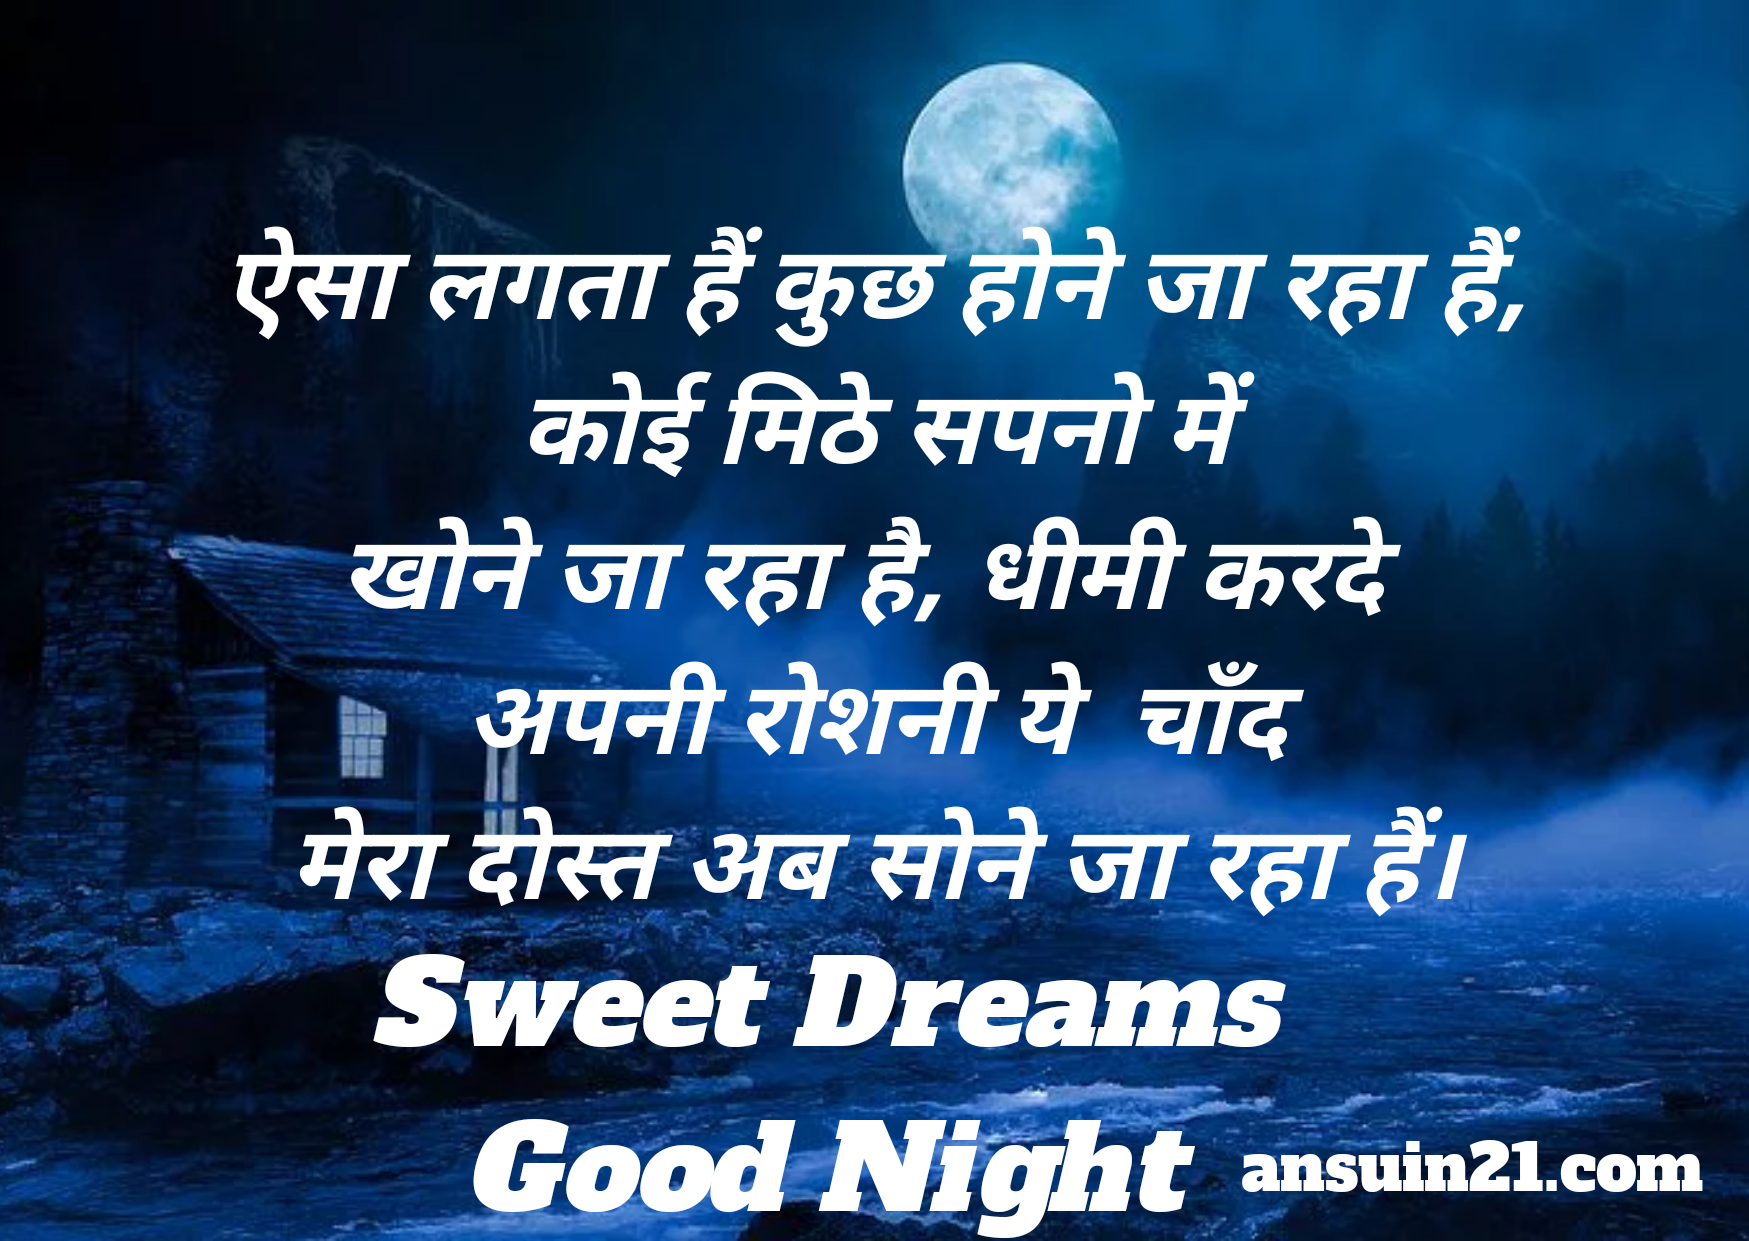 Best Good Night Hindi wishes Status sms Images, Best romantic good night Hindi wishes images for whatsaap free download,